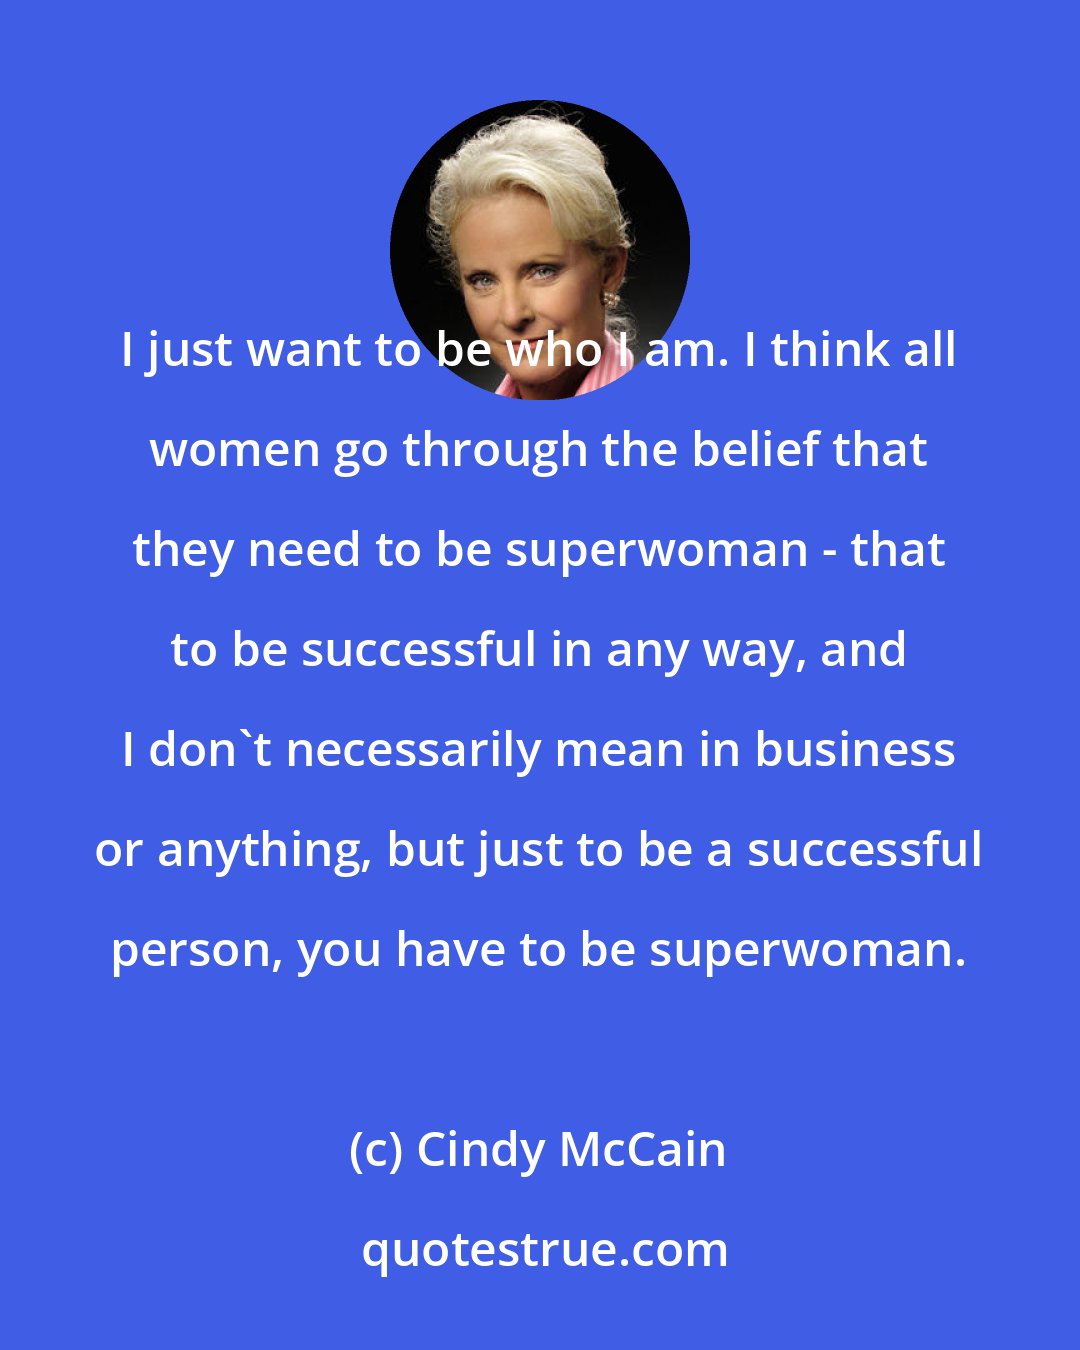 Cindy McCain: I just want to be who I am. I think all women go through the belief that they need to be superwoman - that to be successful in any way, and I don't necessarily mean in business or anything, but just to be a successful person, you have to be superwoman.